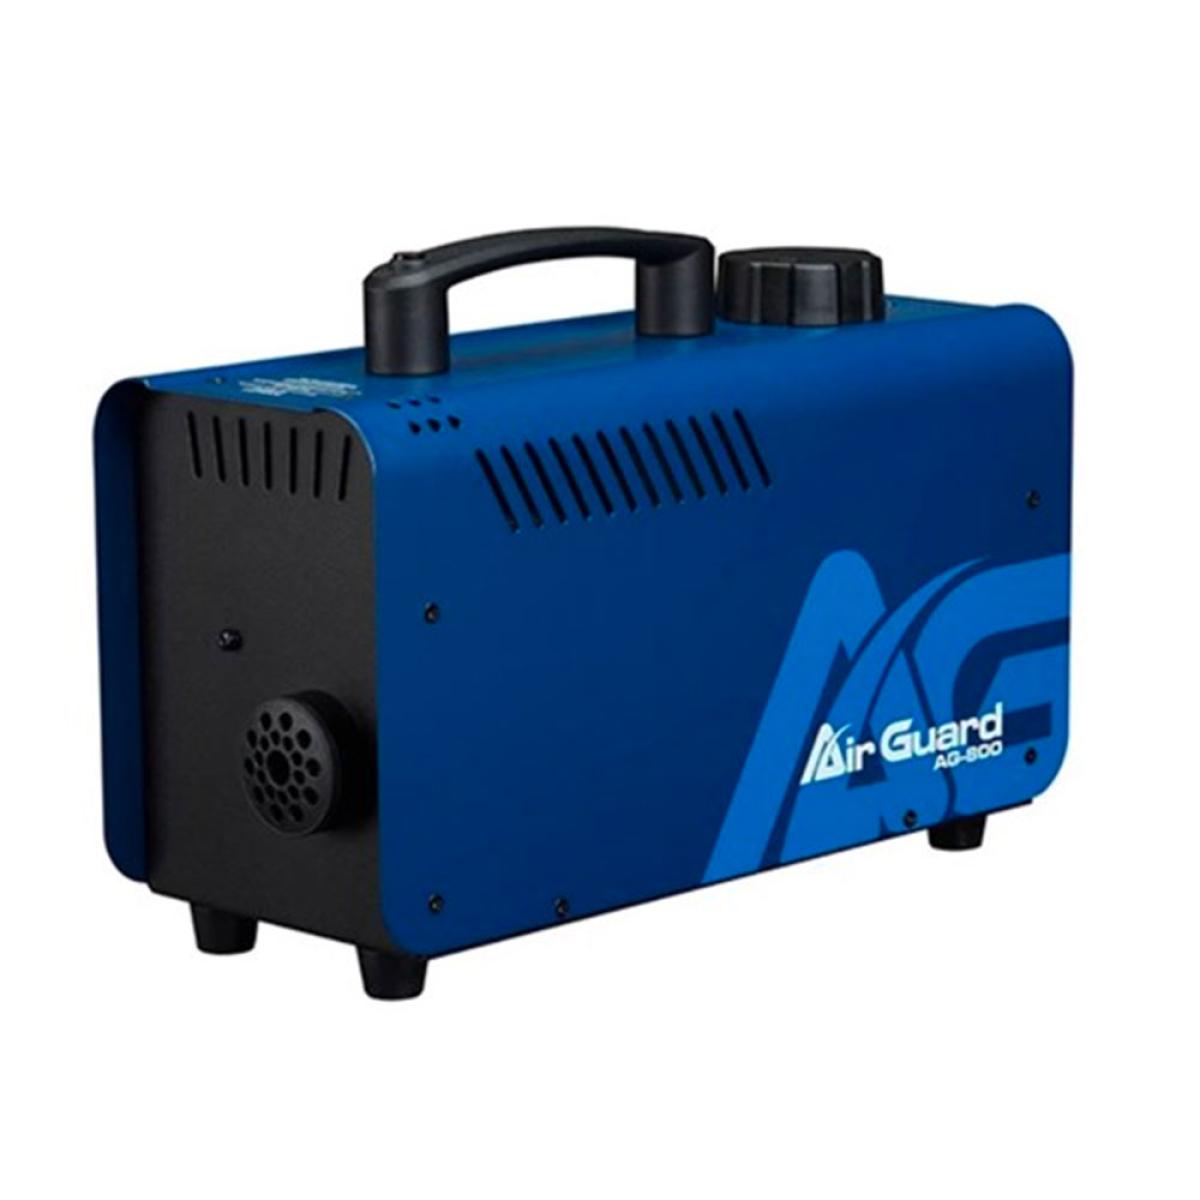 NEW From  Antari Fog Machine : AIR GUARD DISINFECTION MACHINES available at CR Lighting and Audio